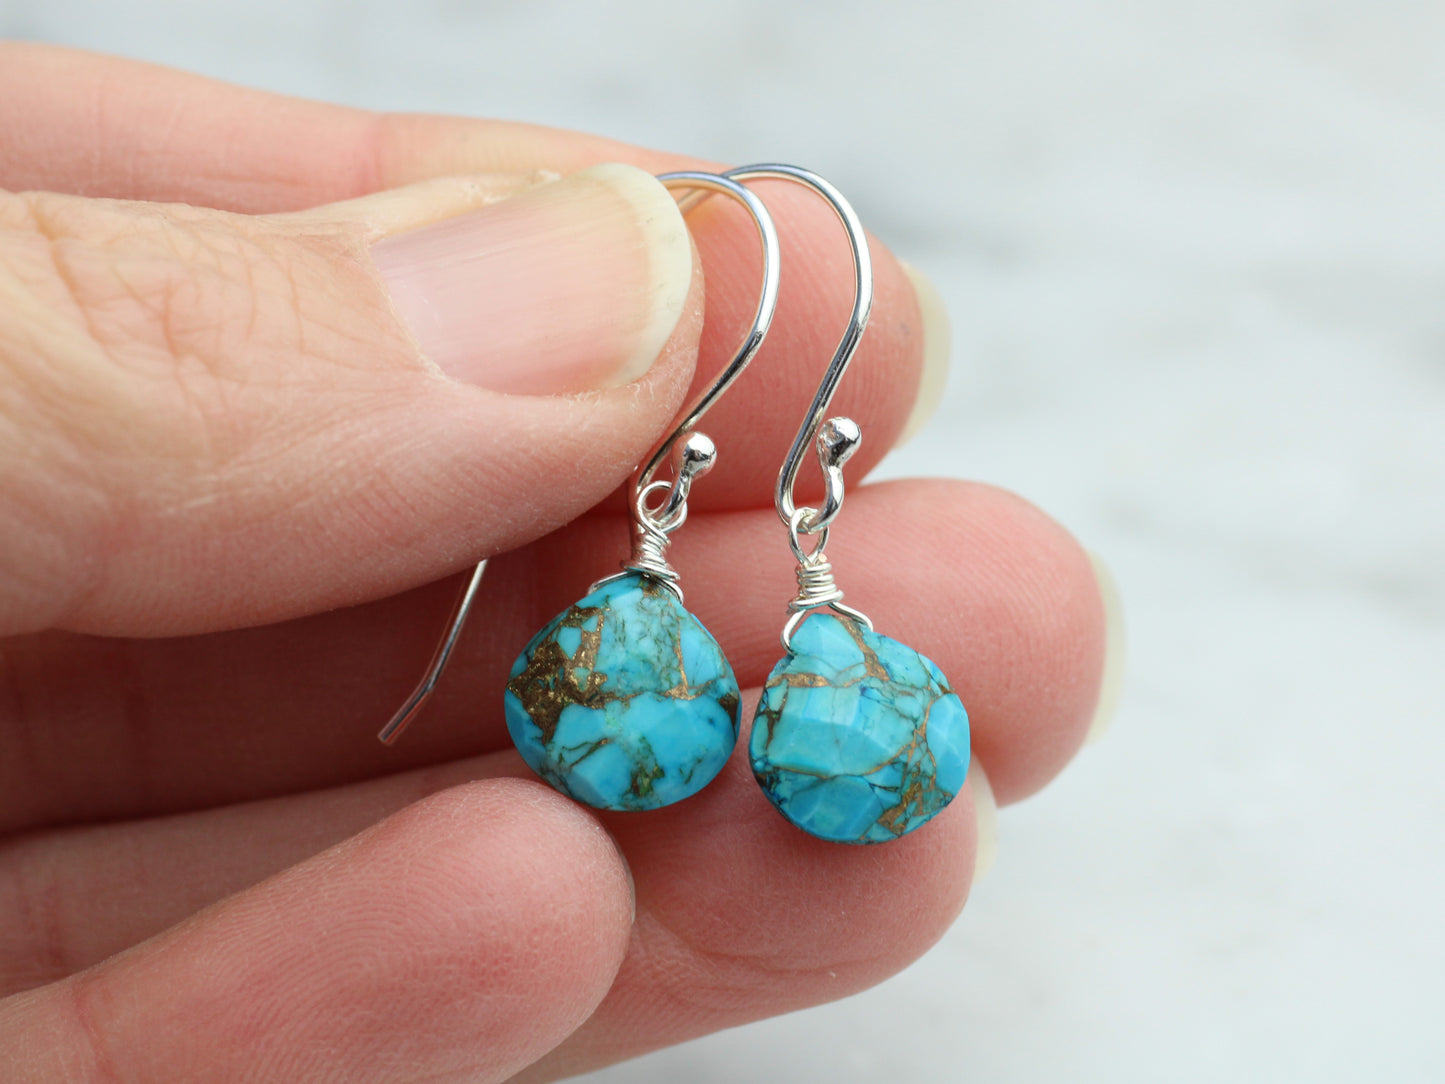 Turquoise earrings in sterling silver or gold.